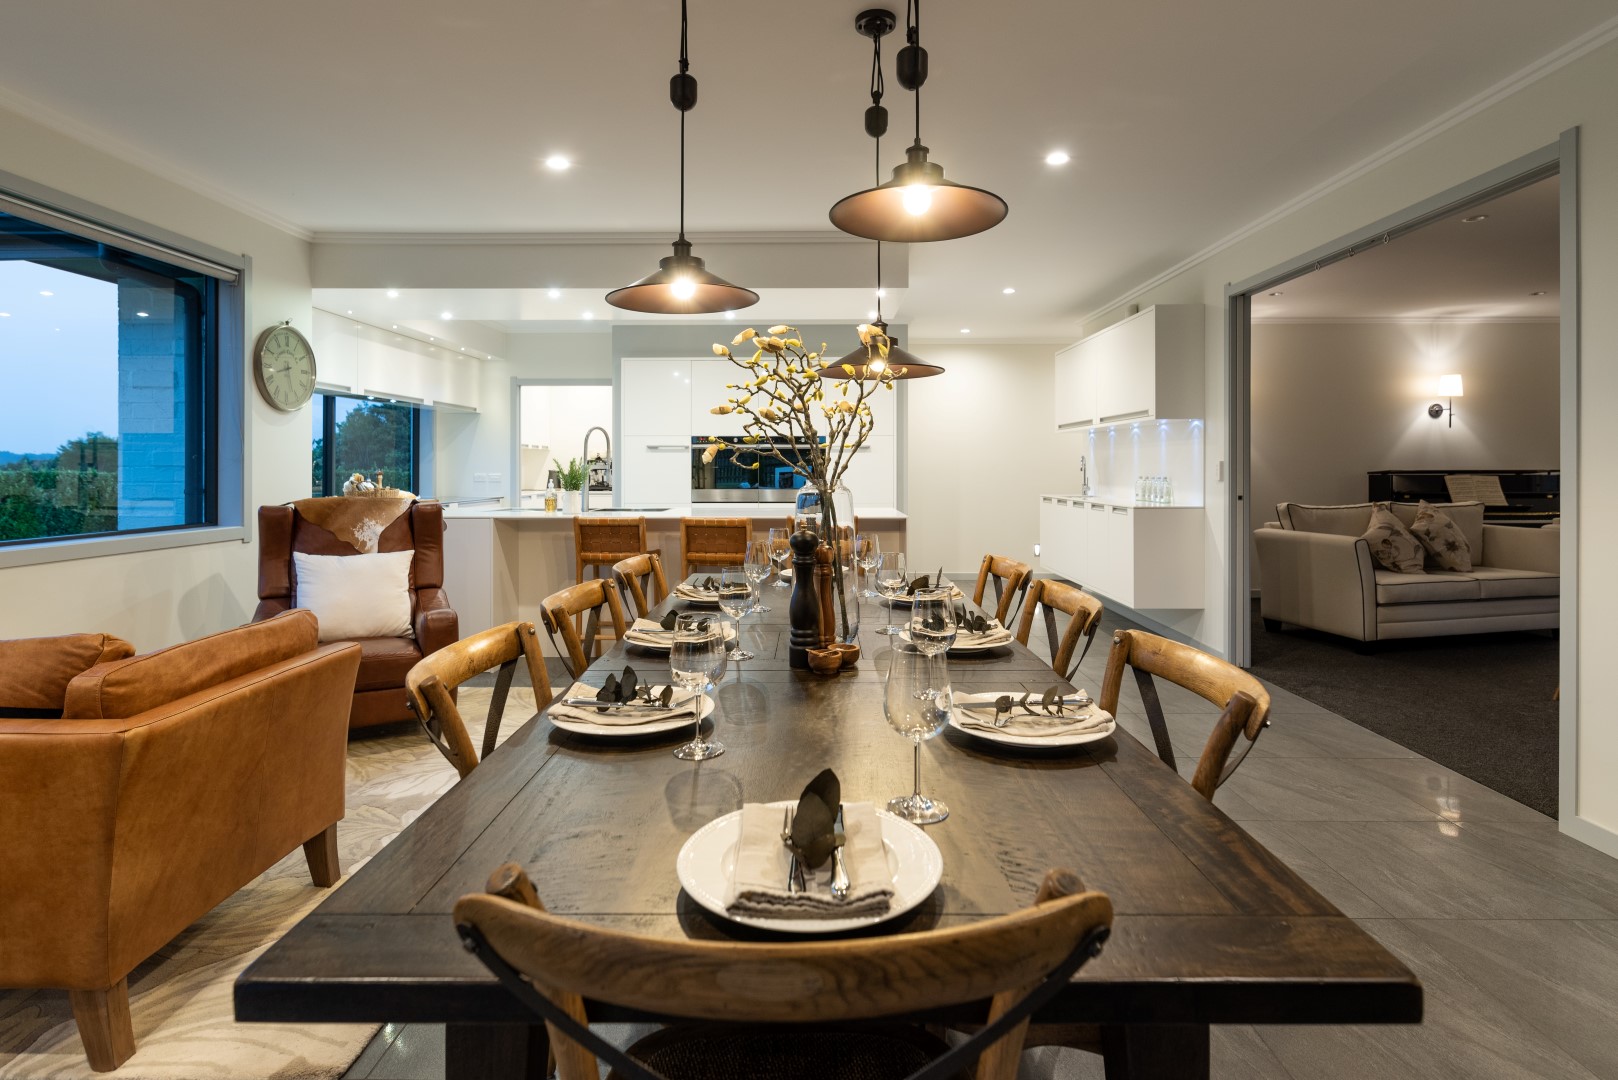 edkins-road-residence-arcline-kerikeri-architecture-dining-room-country-traditional (2)